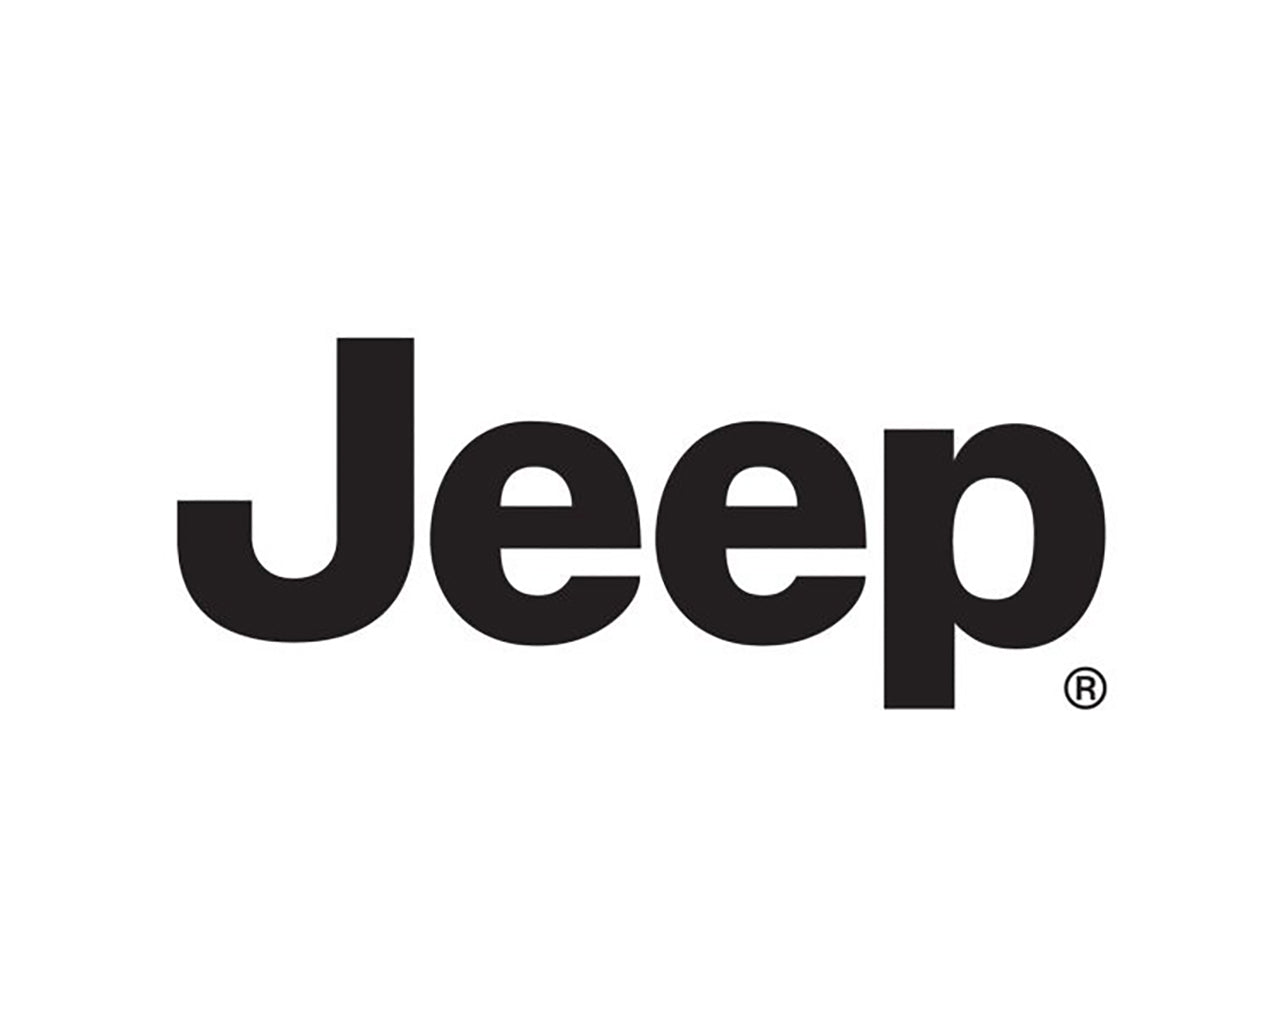 word that says Jeep in all black on white background